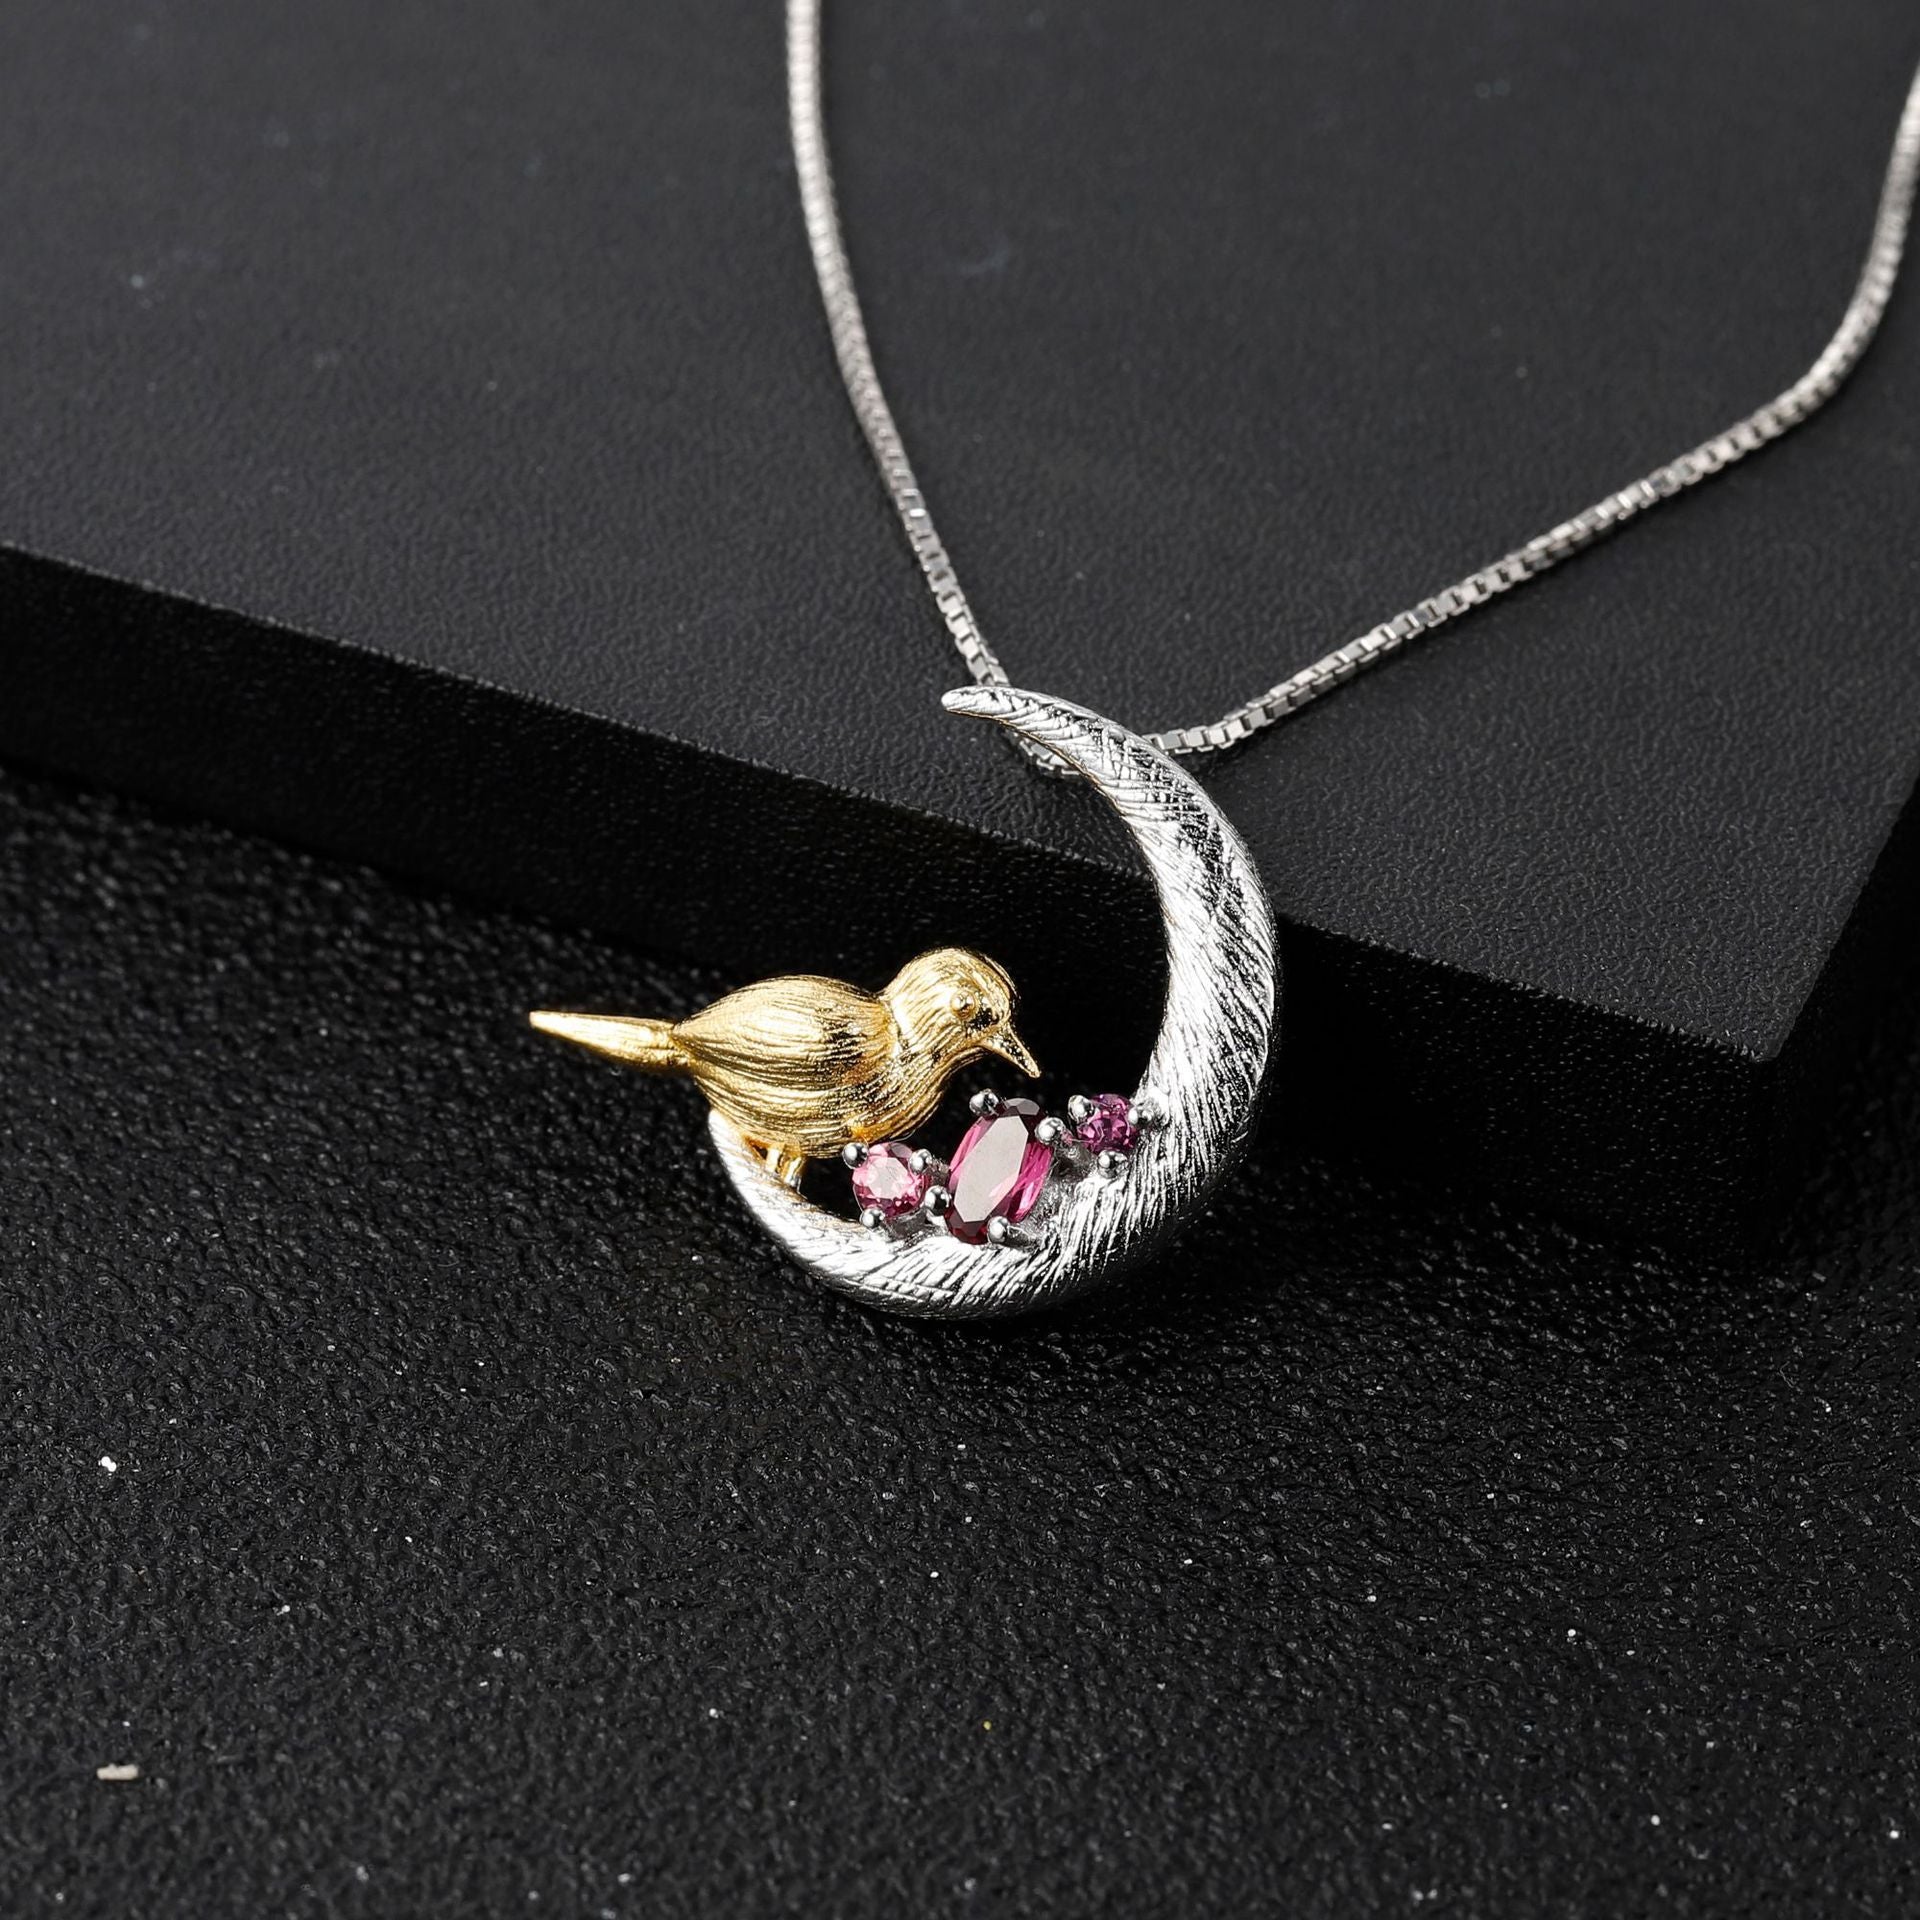 National Style Natural Colourful Gemstone Bird and Crescent Pendant Silver Necklace for Women